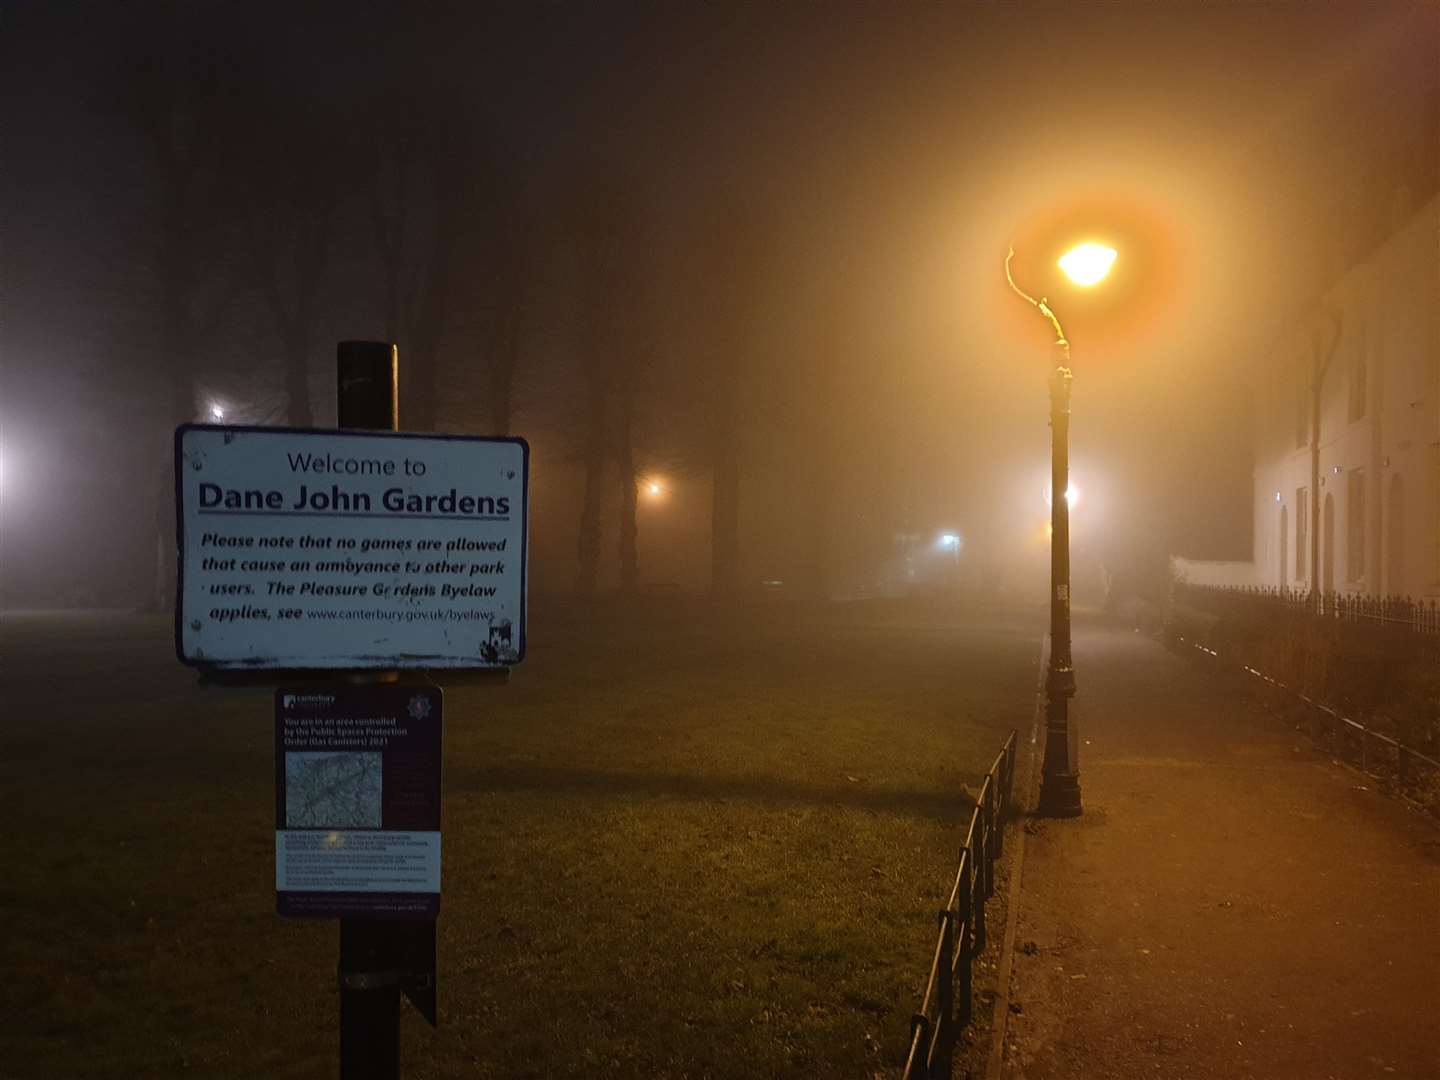 Dane John Gardens in Canterbury has well known for being a magnet for crime during the night